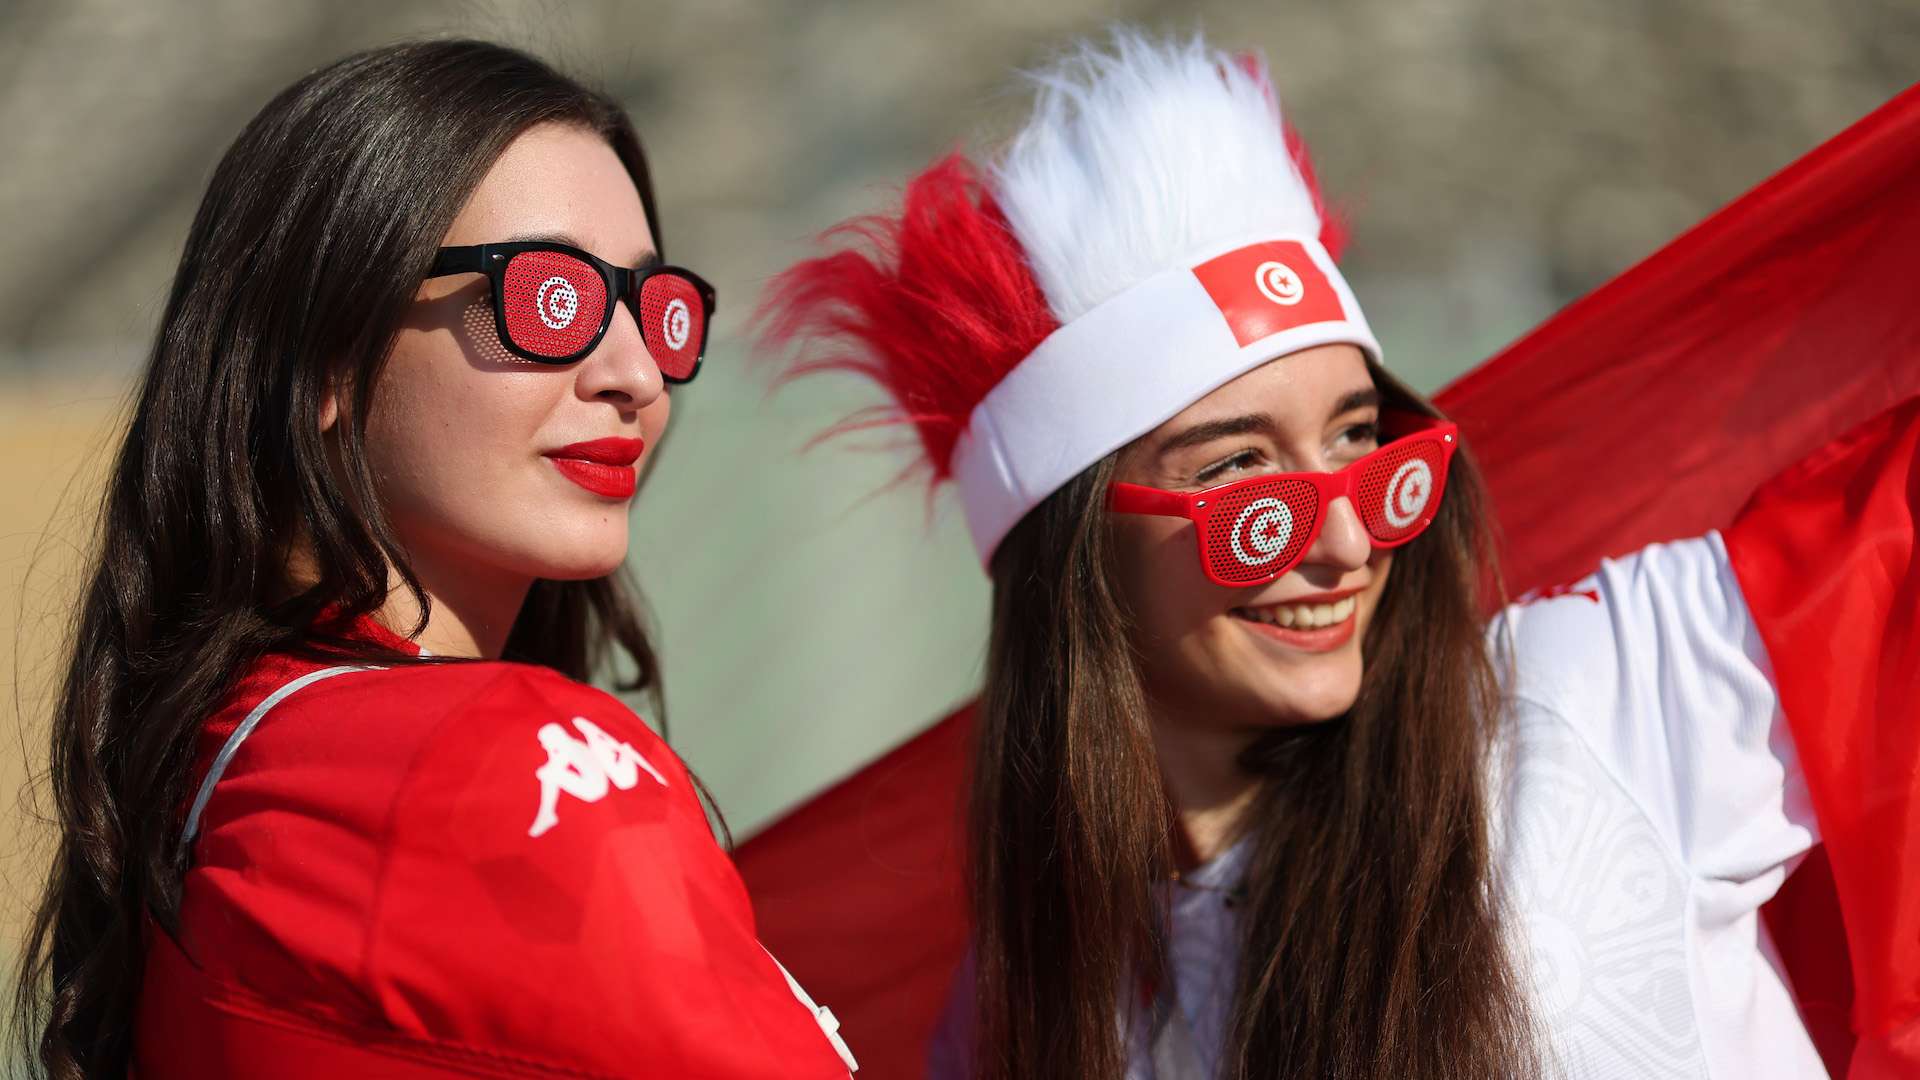 Tunisia World Cup 2022 Supporter